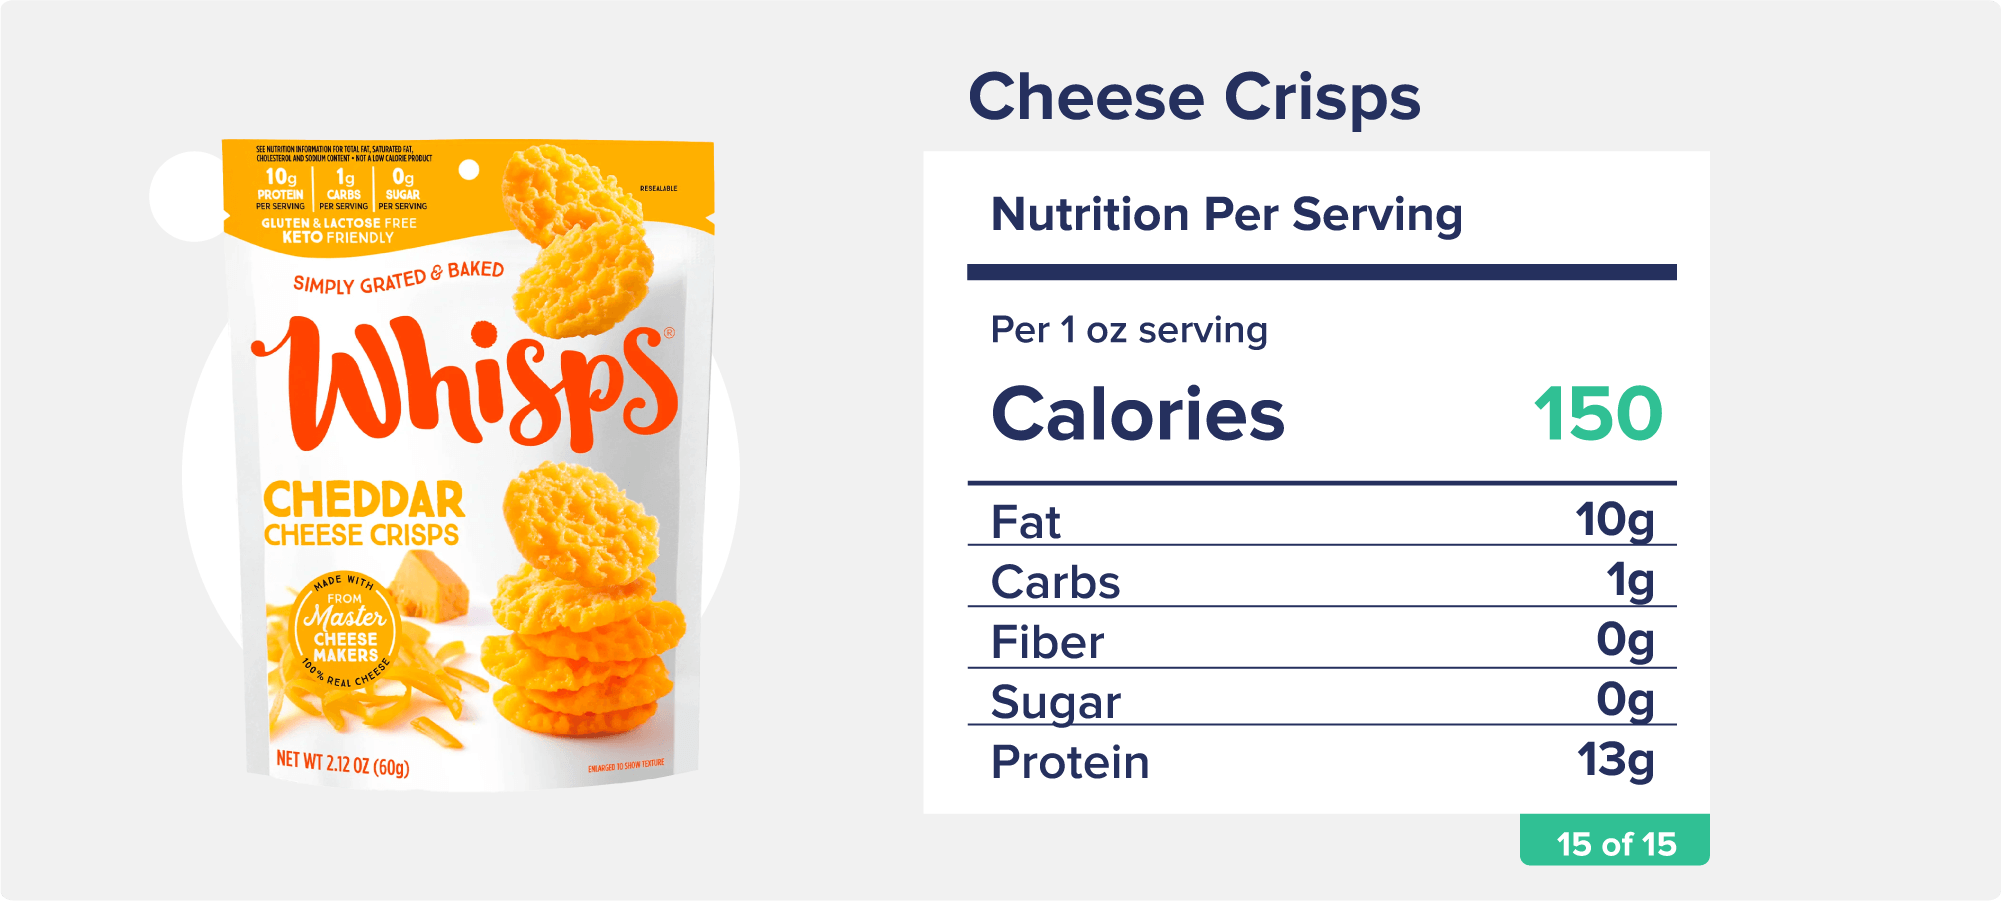 A package of Whisps brand Cheddar Cheese Crisps along with accompanying nutrition facts like calories, fat, and protein.